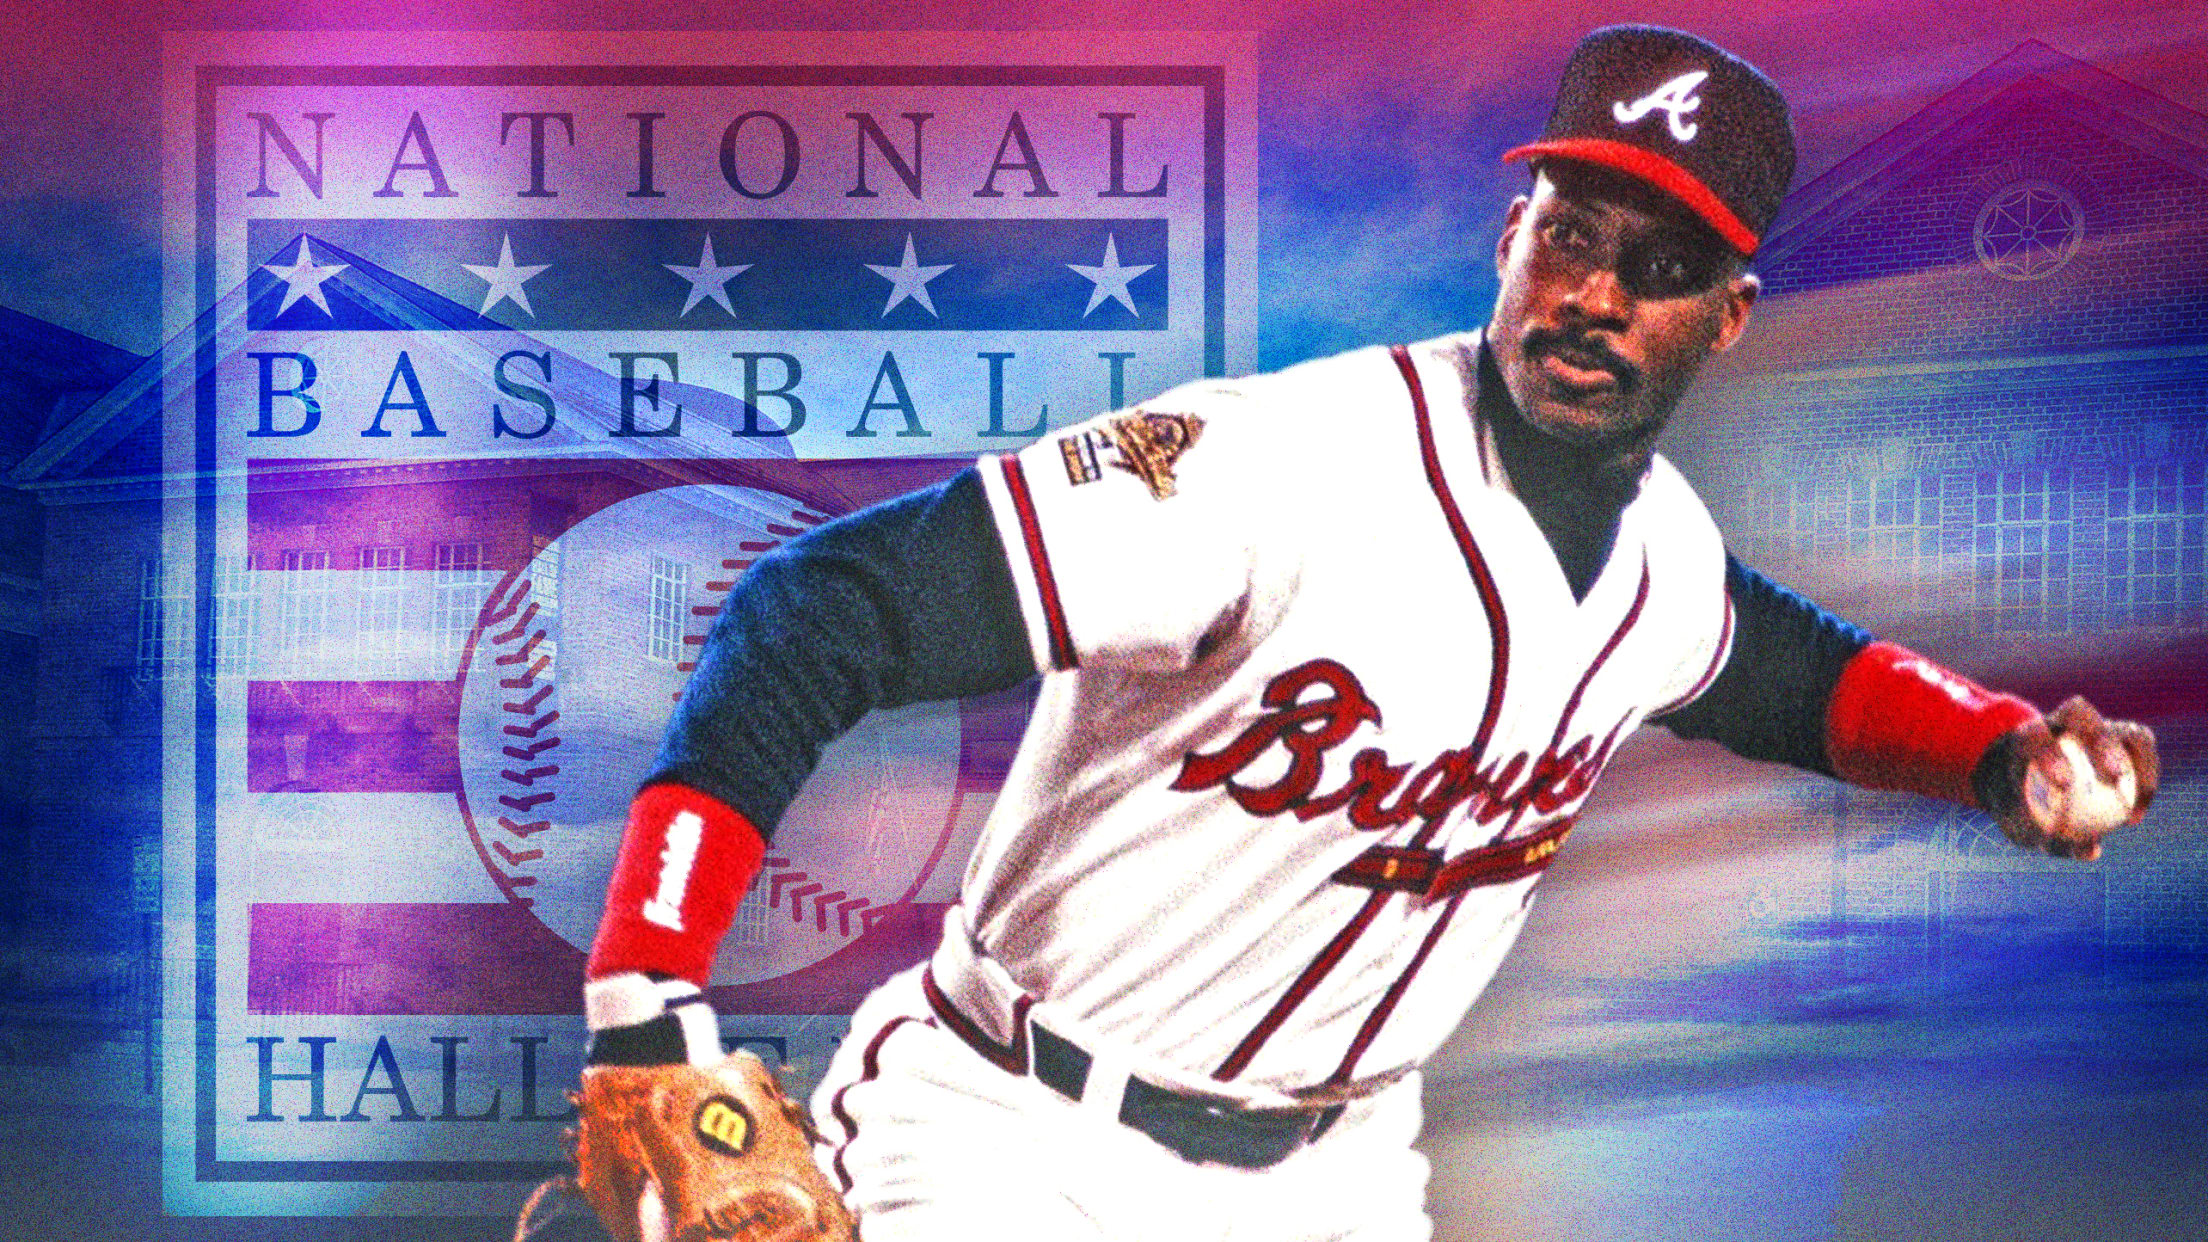 Fred McGriff about to throw in a Braves uniform, against a background that includes the Hall of Fame logo